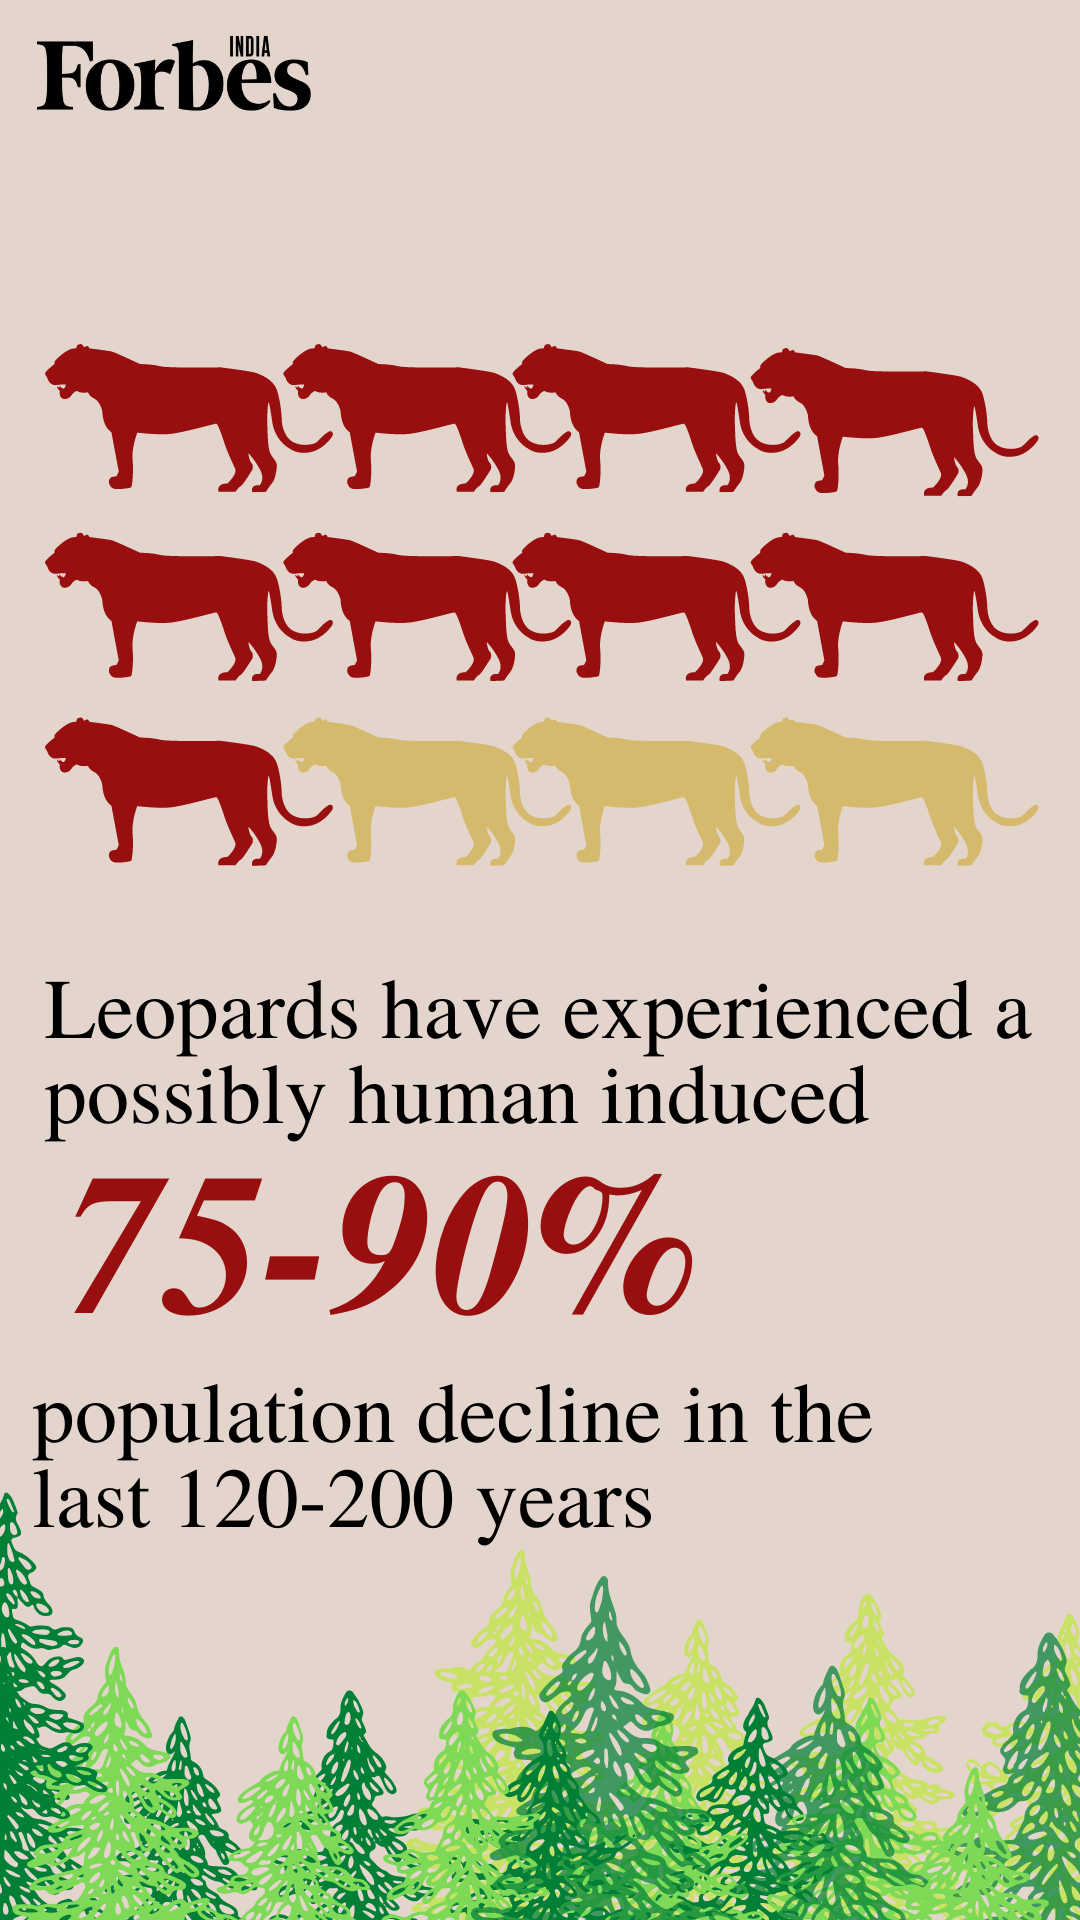 News by Numbers: India's leopard population grows 62% in 4 years but still 'vulnerable'